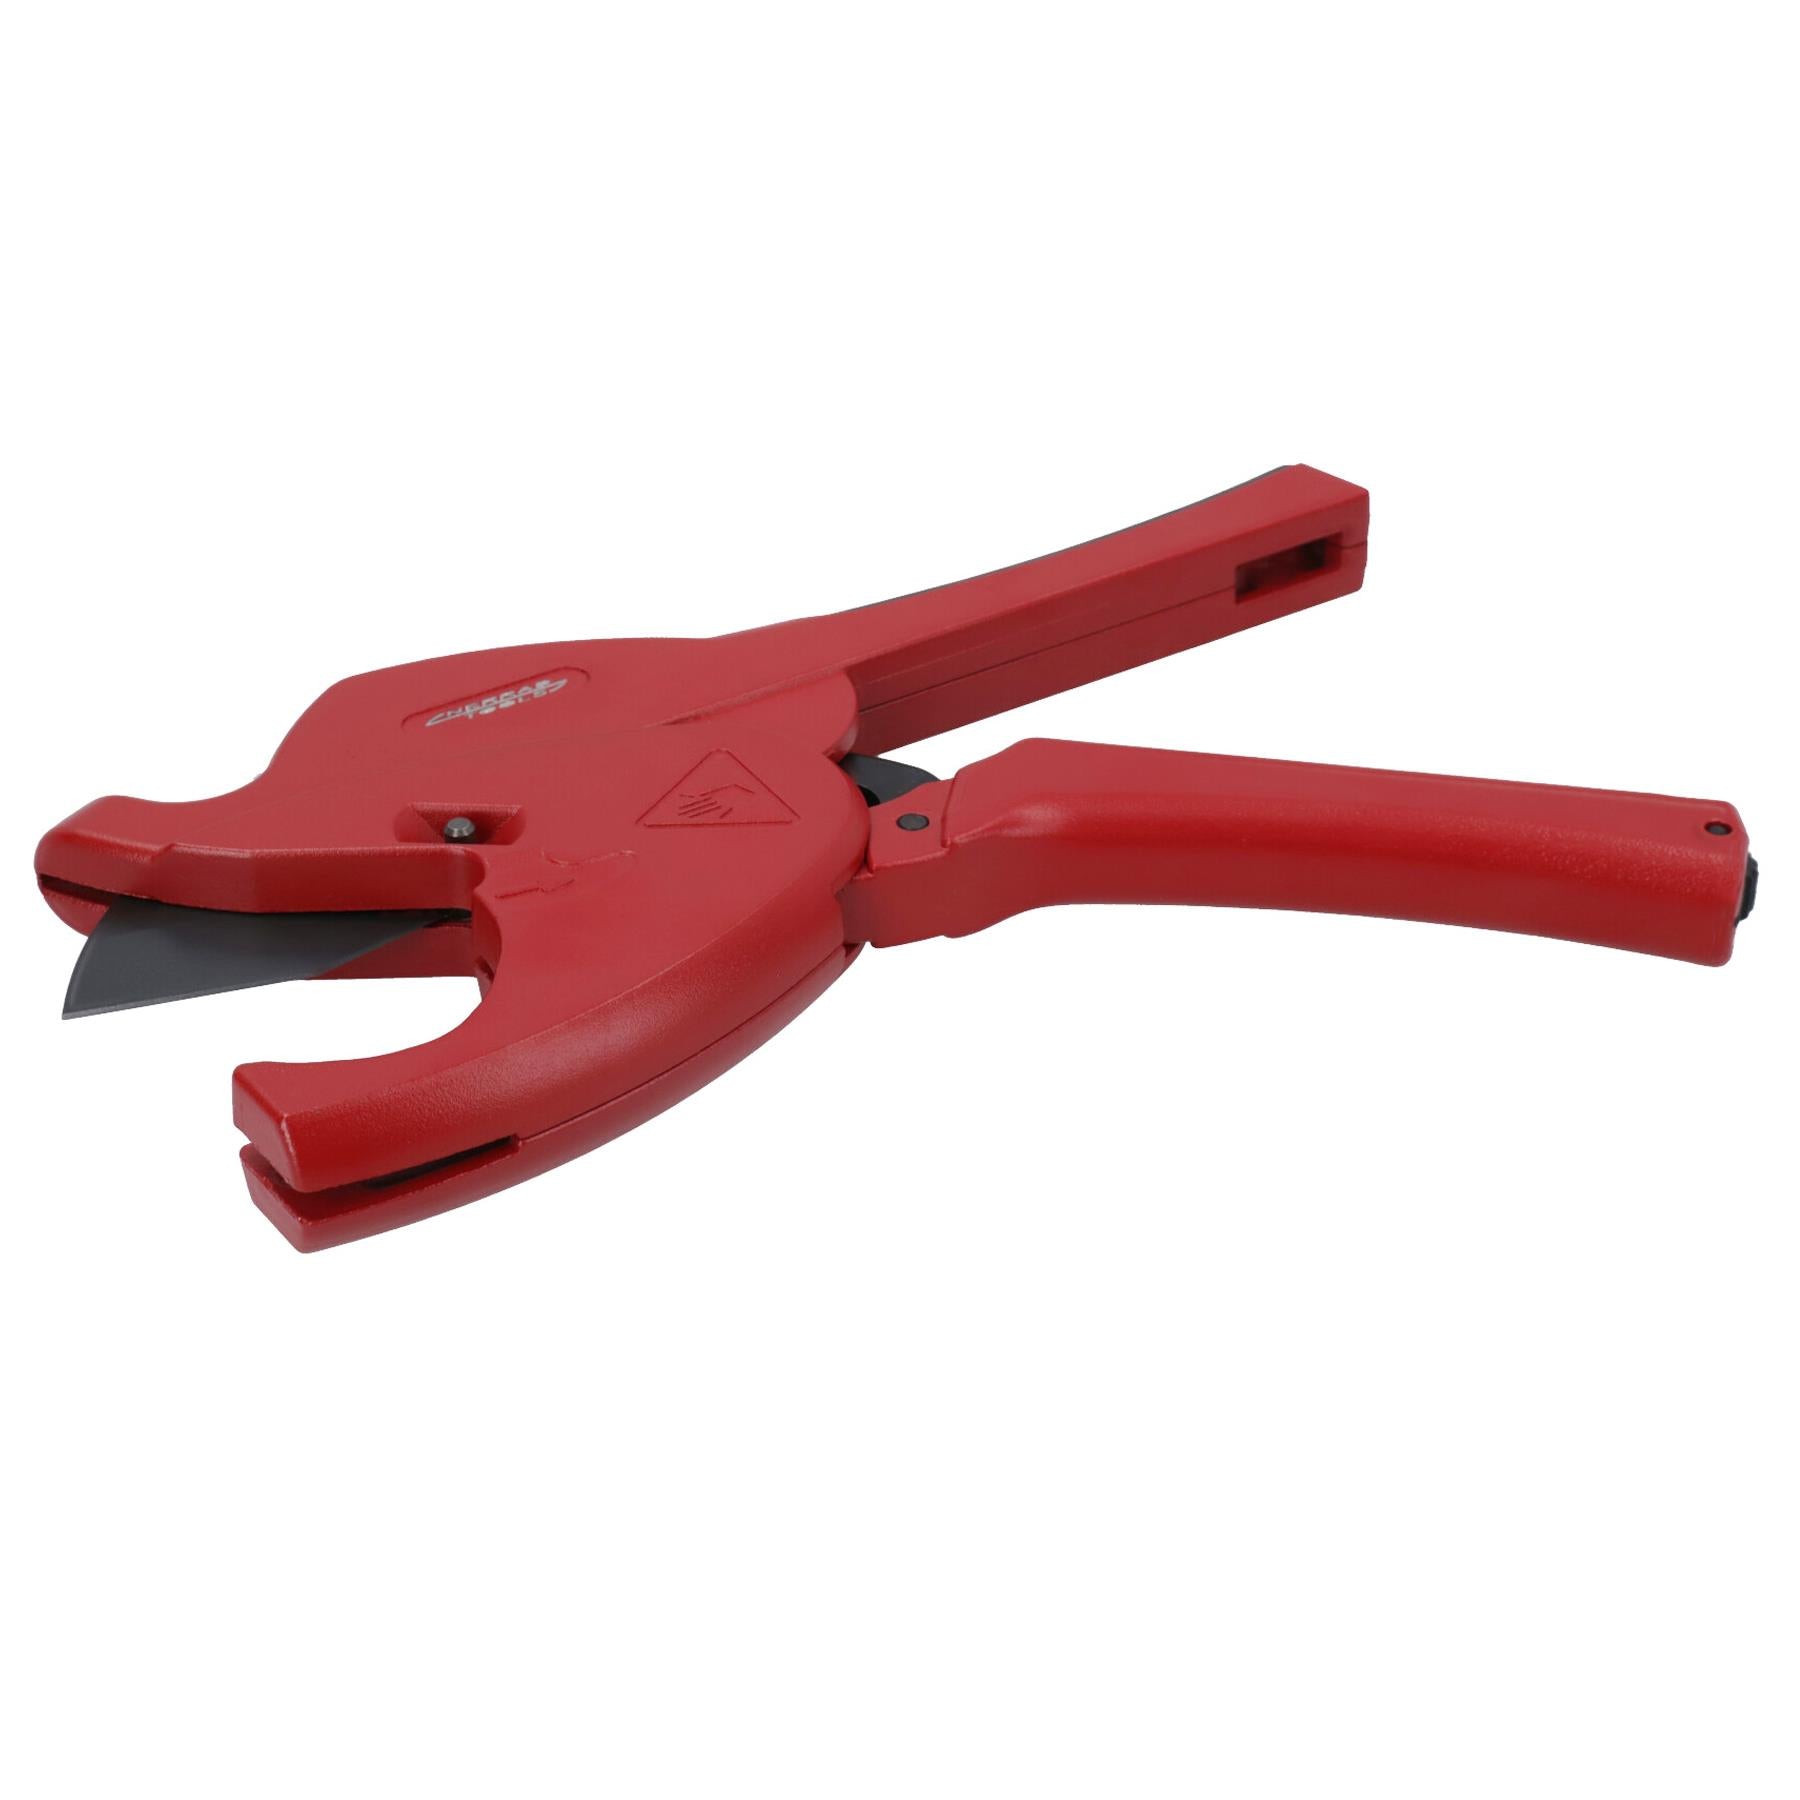 Ratchet Action PVC and Multi Layer Tube Cutter Slicer for Pipes Up To 50mm